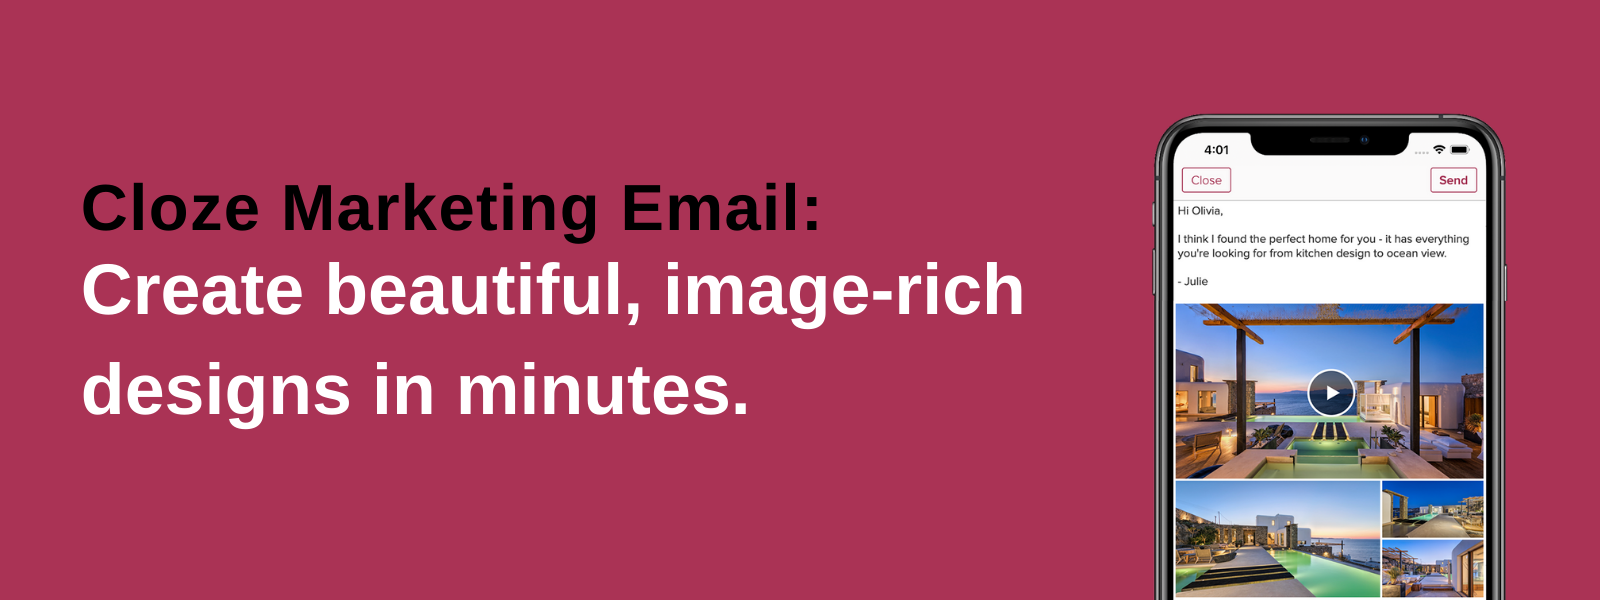 Cloze Marketing Email: Create beautiful, image-rich designs in minutes. 